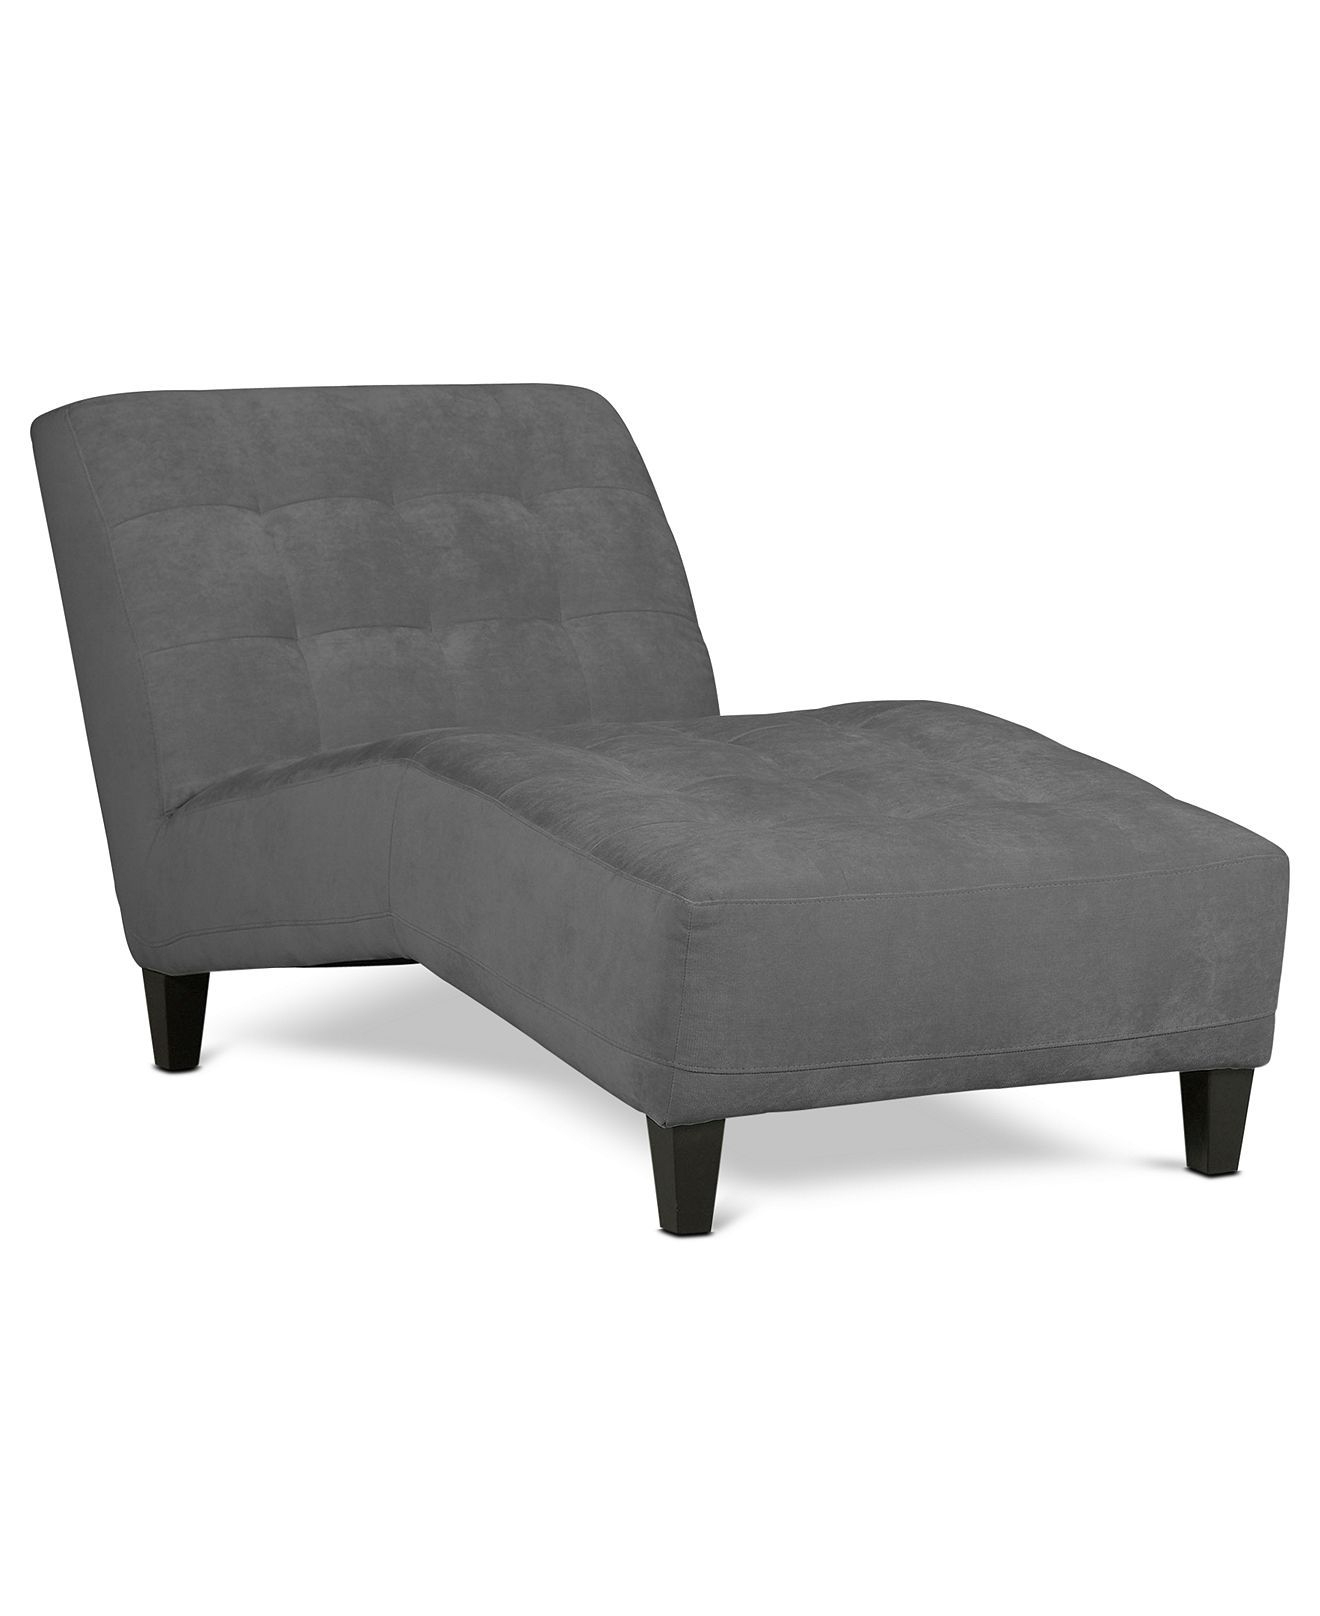 My New Chaise - But The Dustin Ii Model. I'm Going To Pick ... tout Chaise But